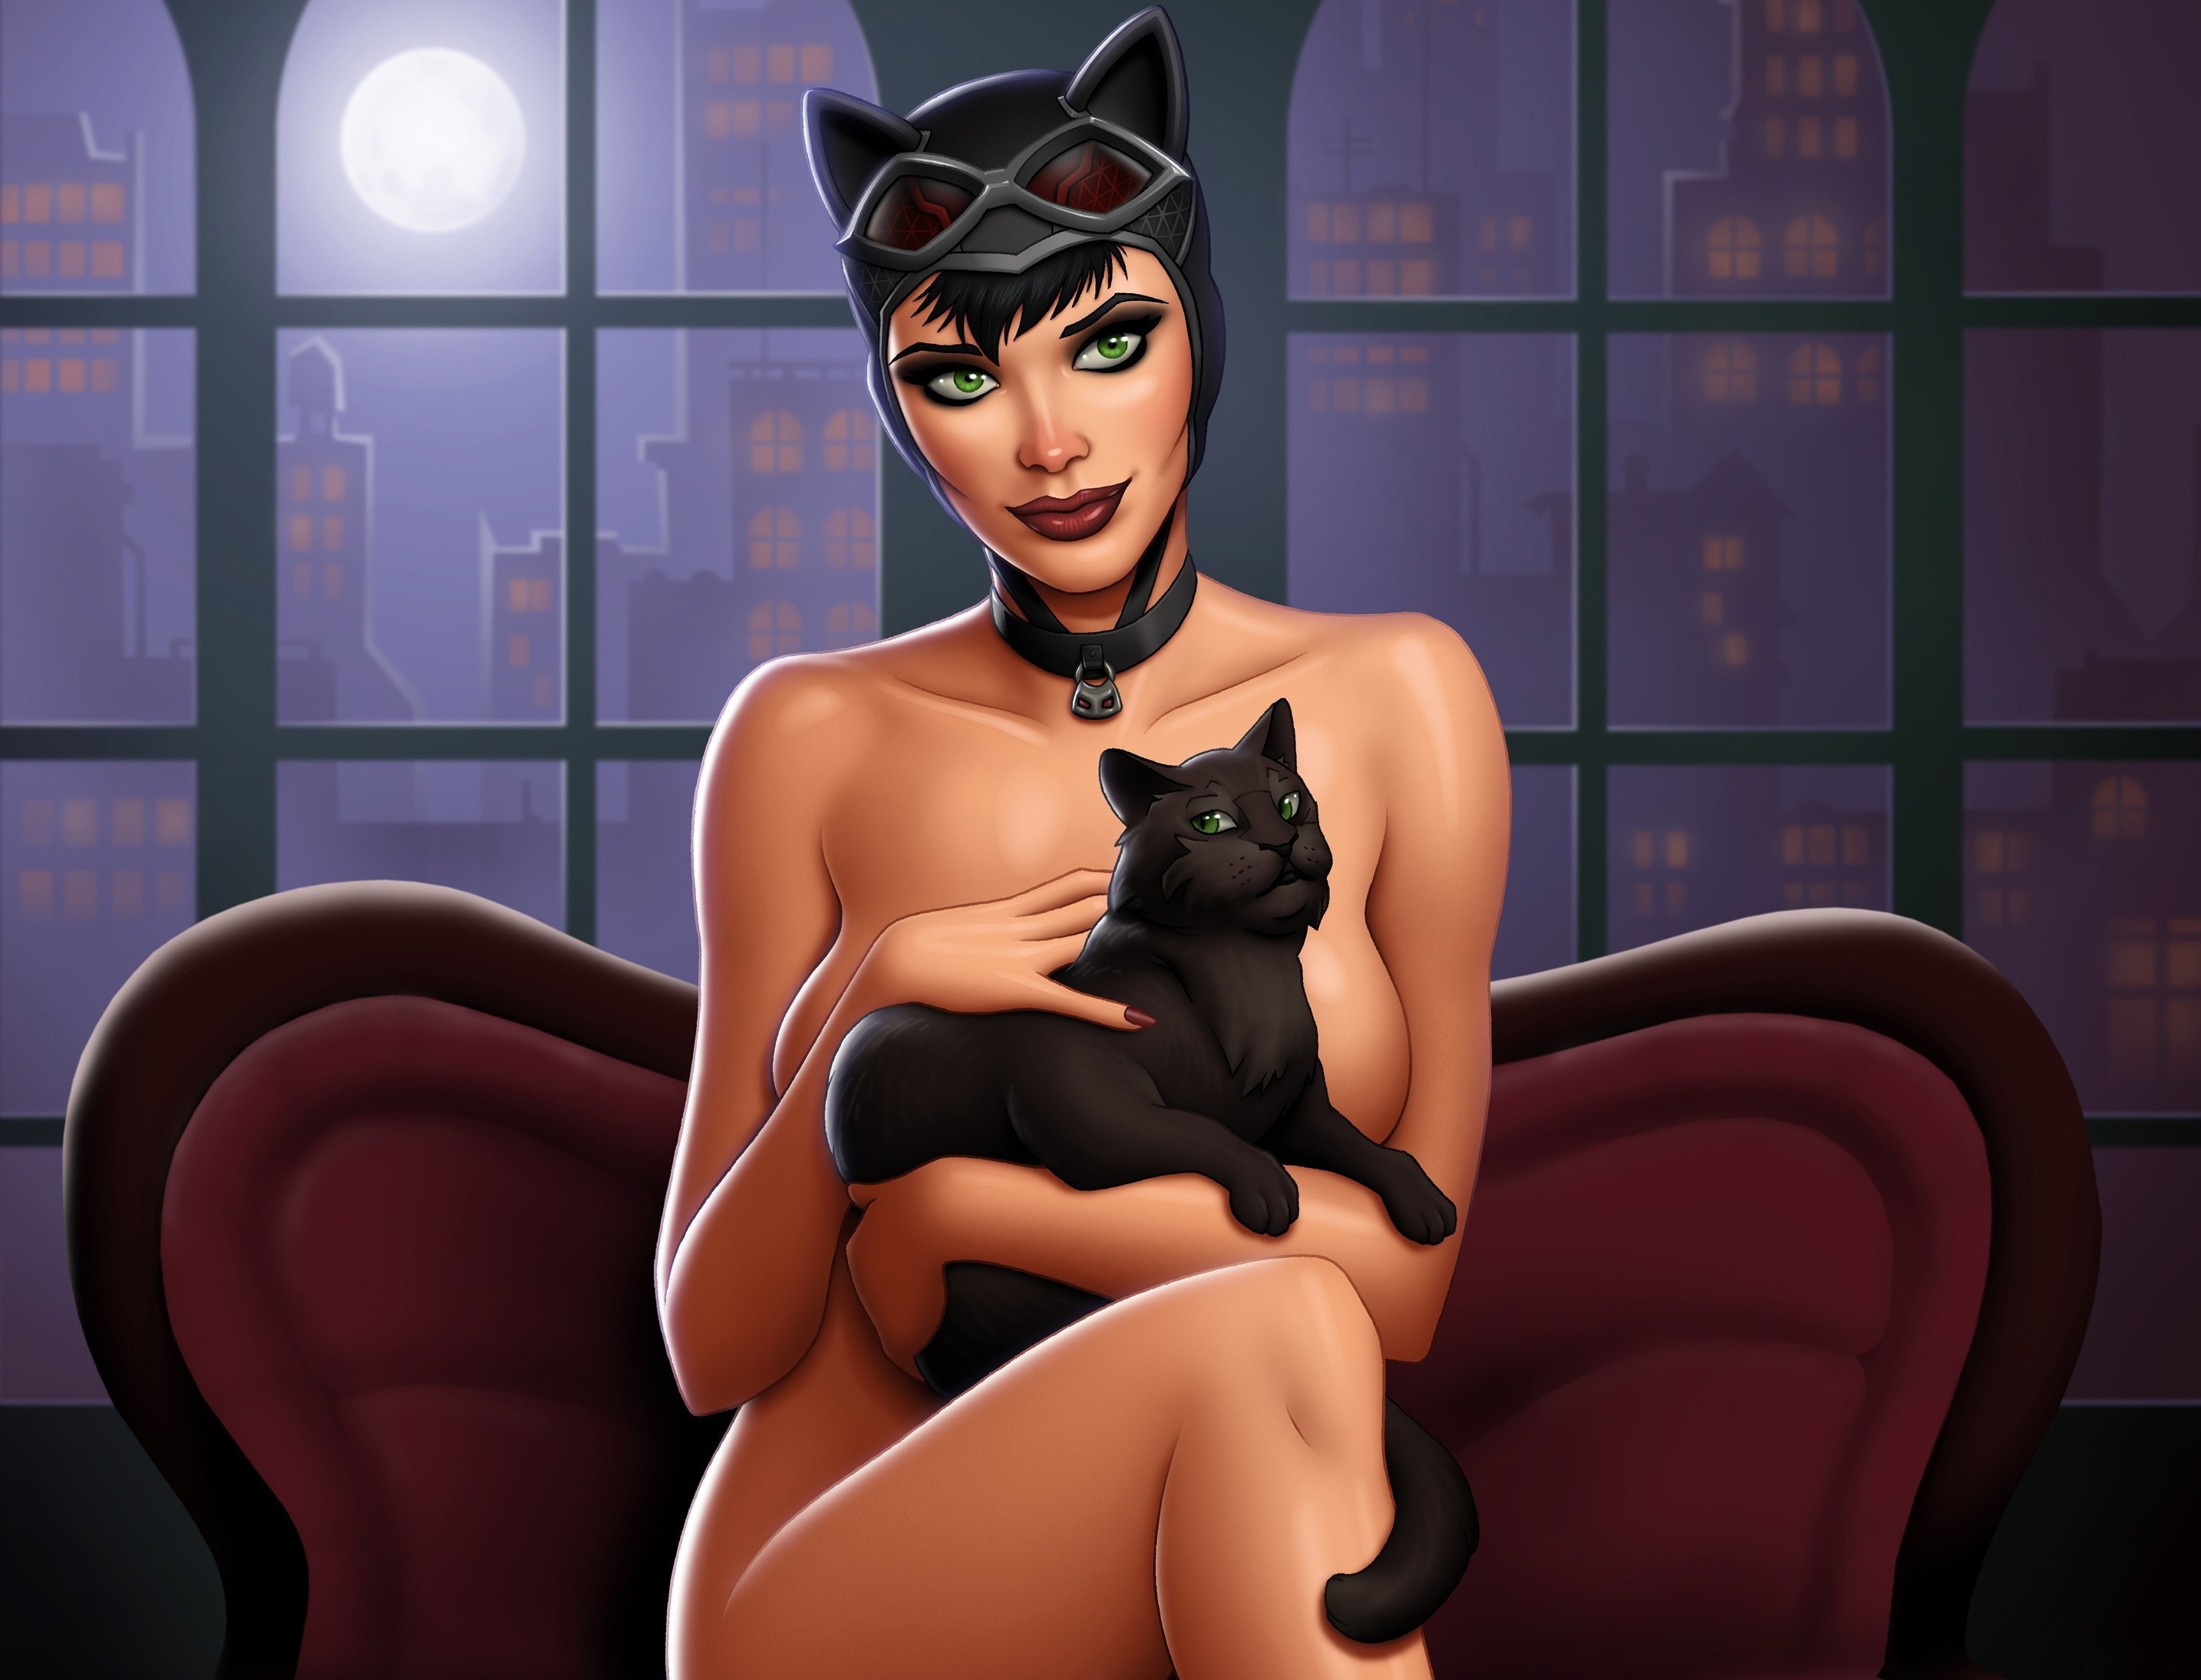 Catwoman is naked